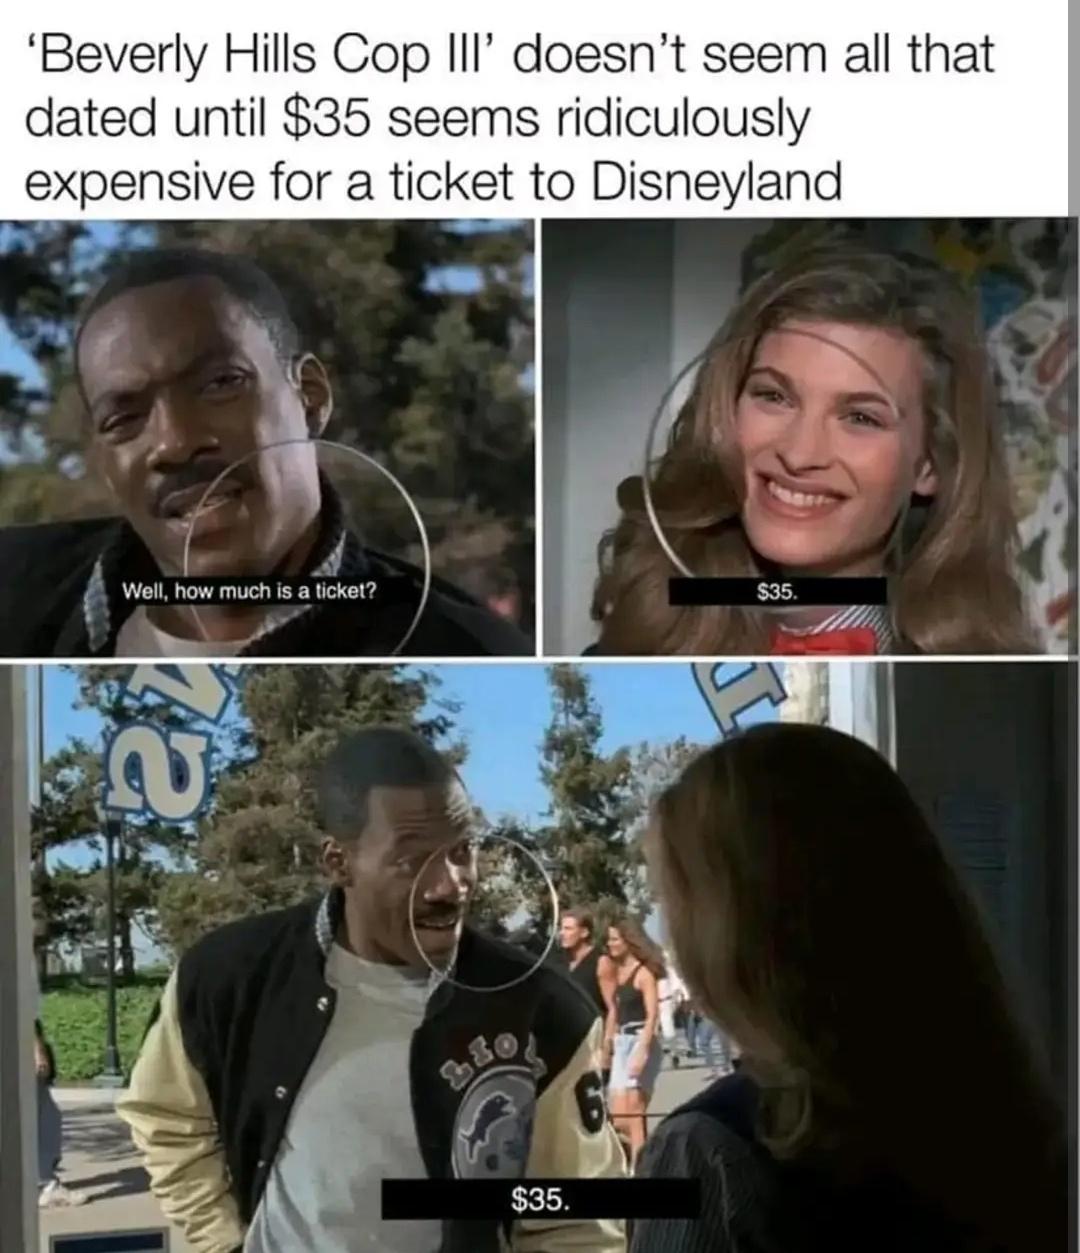 fresh memes - - - 'Beverly Hills Cop Iii' doesn't seem all that dated until $35 seems ridiculously expensive for a ticket to Disneyland Well, how much is a ticket? V 180 $35. $35.